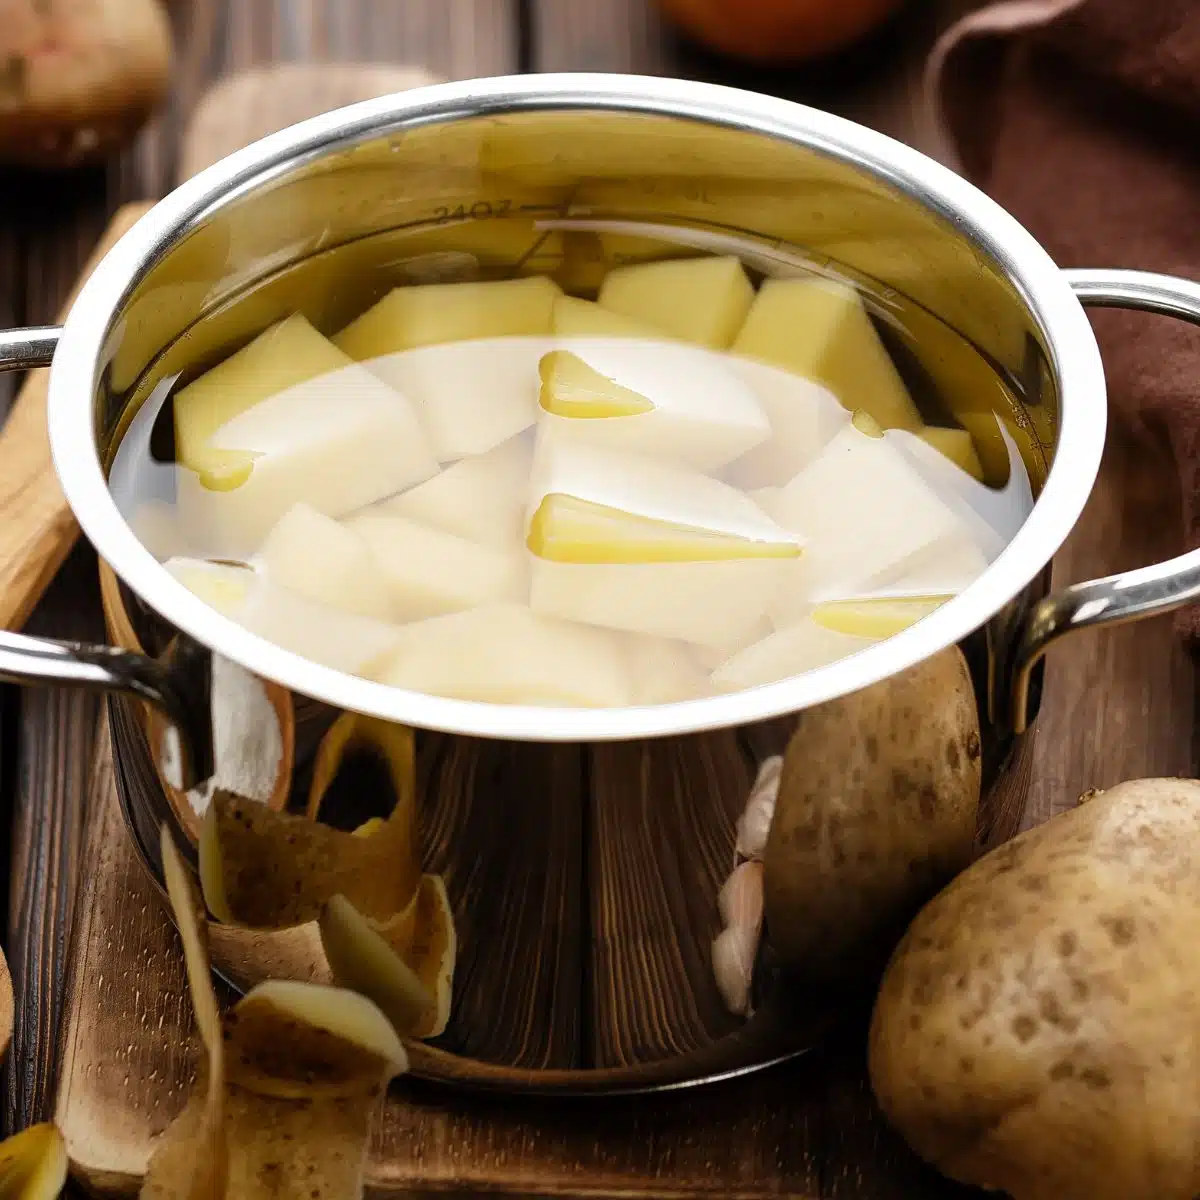 Square image of potatoes boiling.